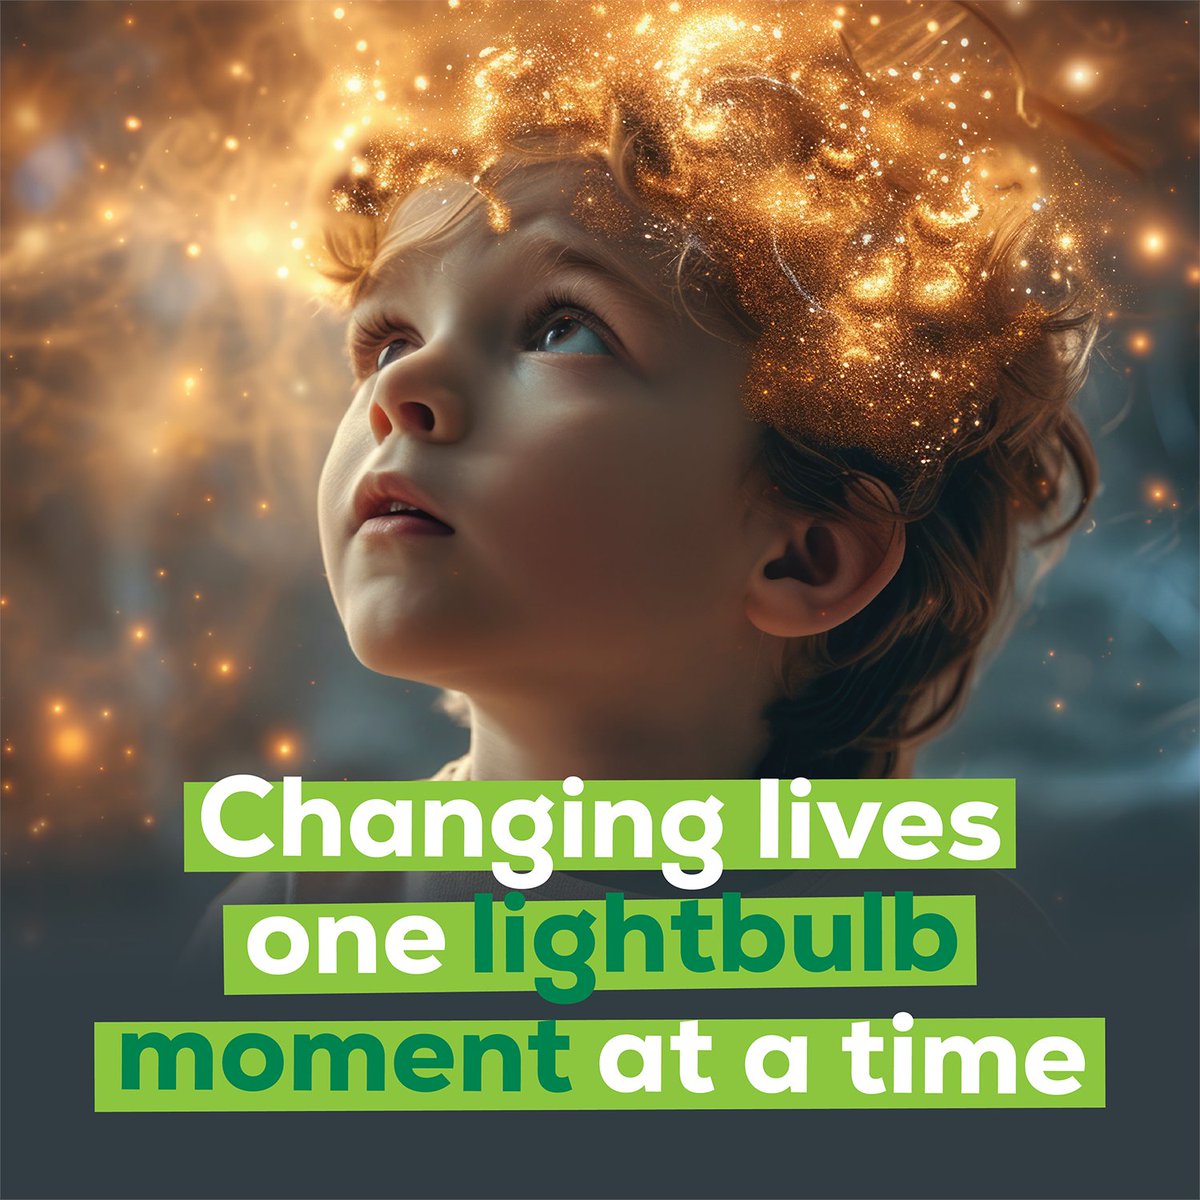 'The excitement and joy a student gets when that spark clicks and they understand something is a great feeling.' ✨ Courtney Williams, drama trainee

Read more on the magic of the #LightbulbMoment here 💡- link.nelt.co.uk/06HWt